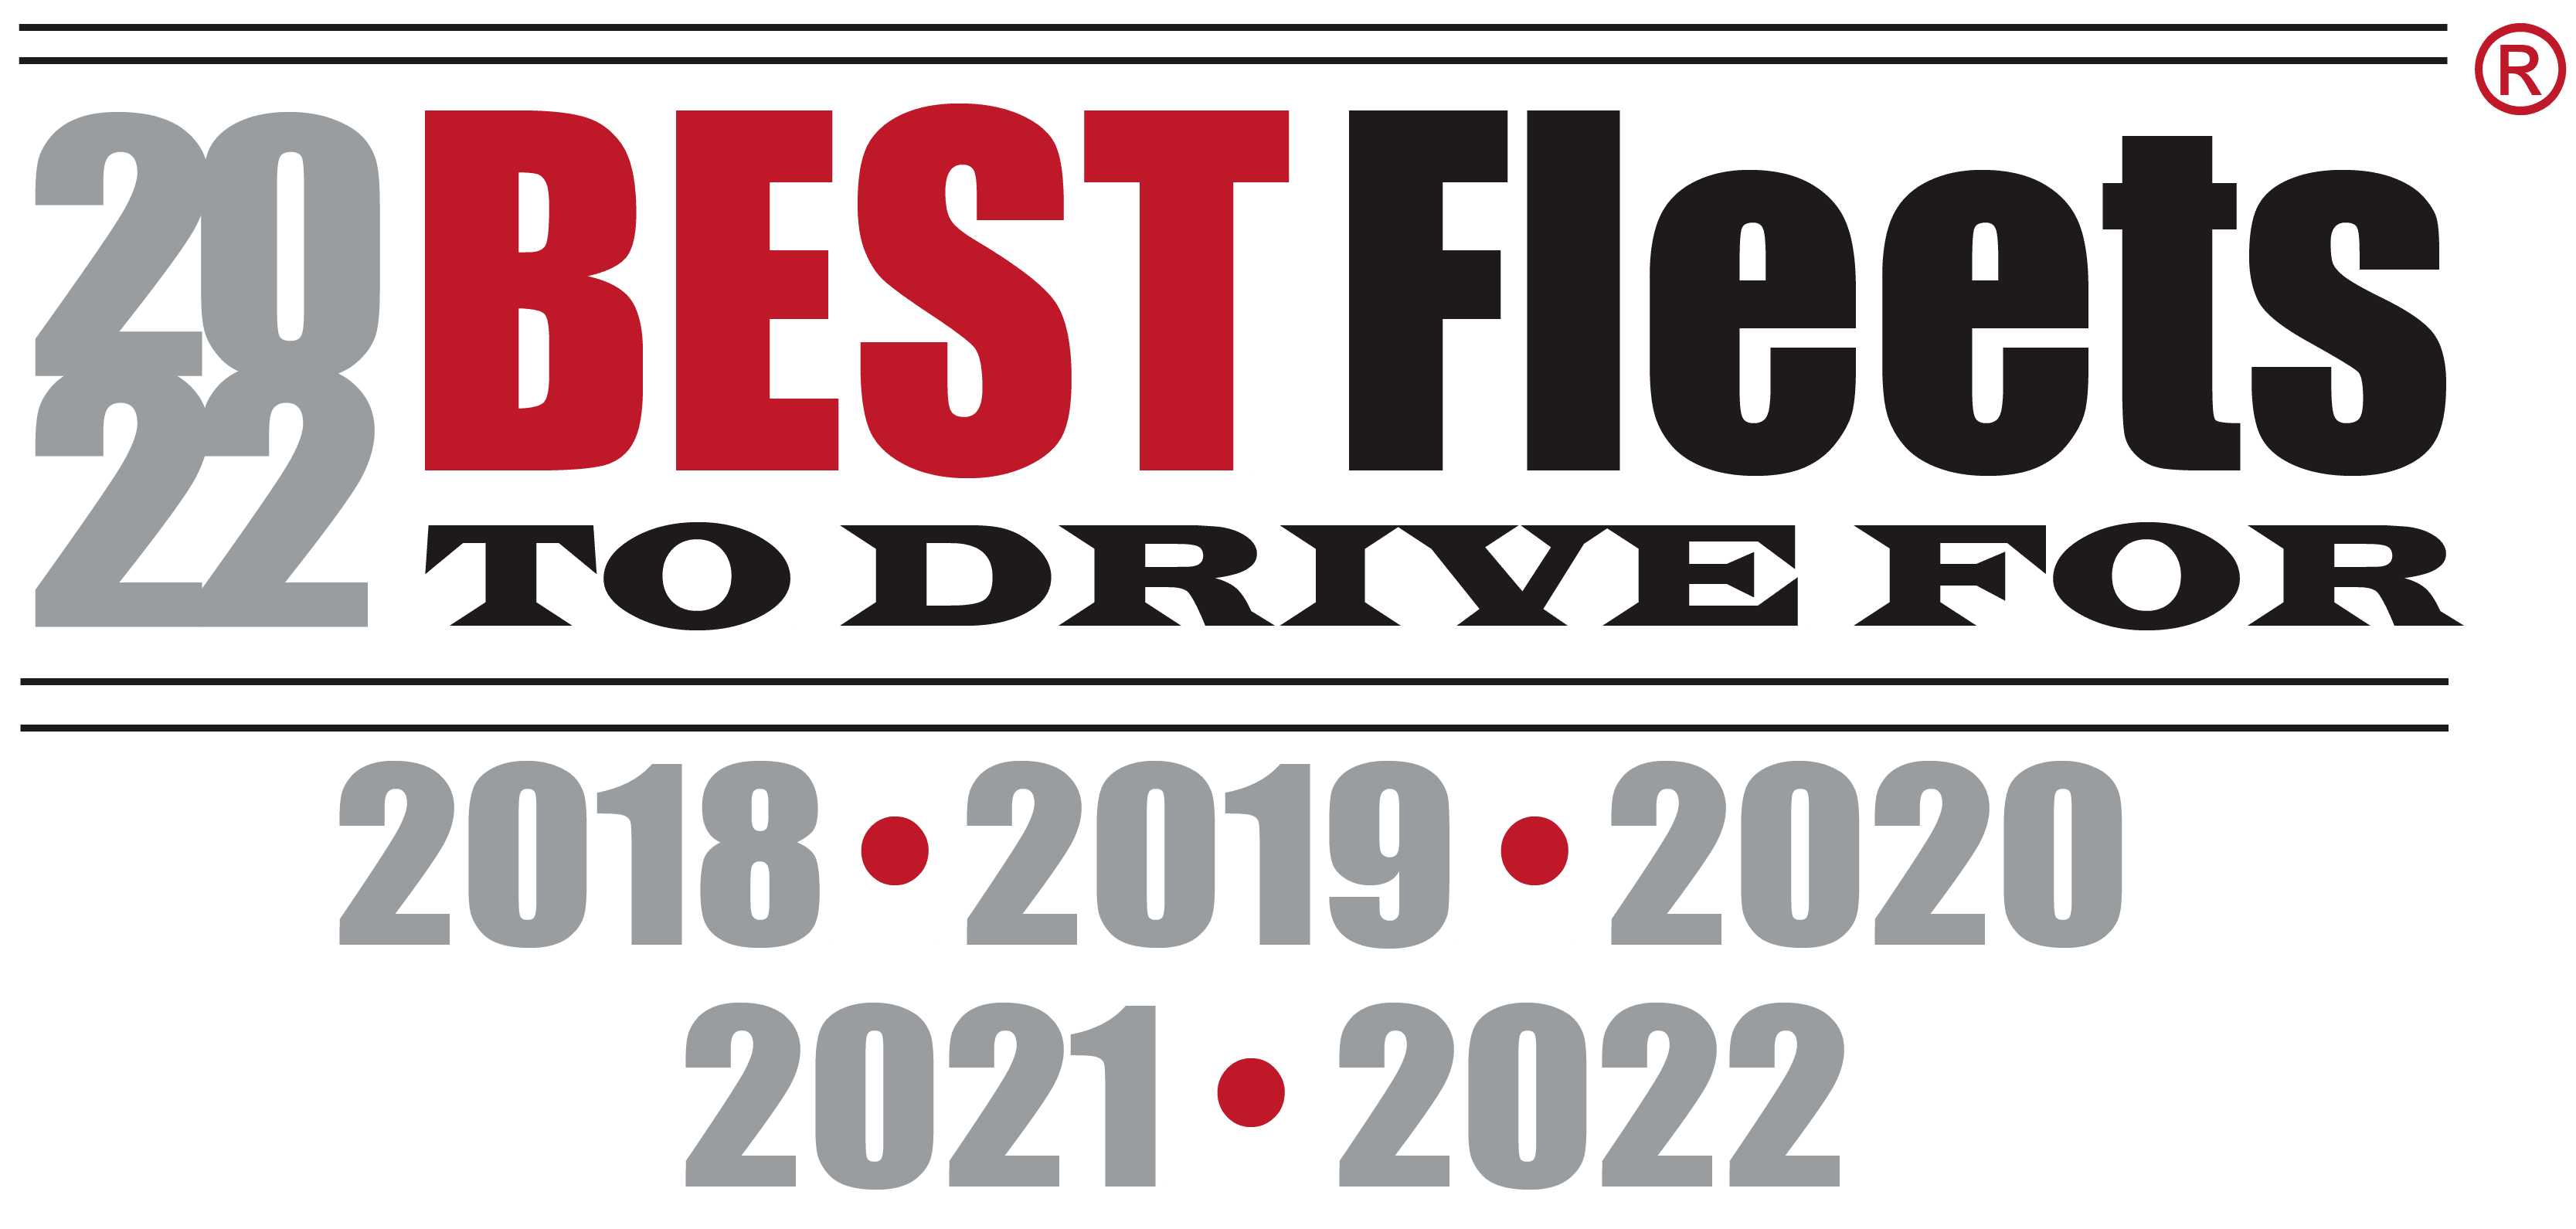 2022 Best Fleets to Drive For | 5 Consecutive Years